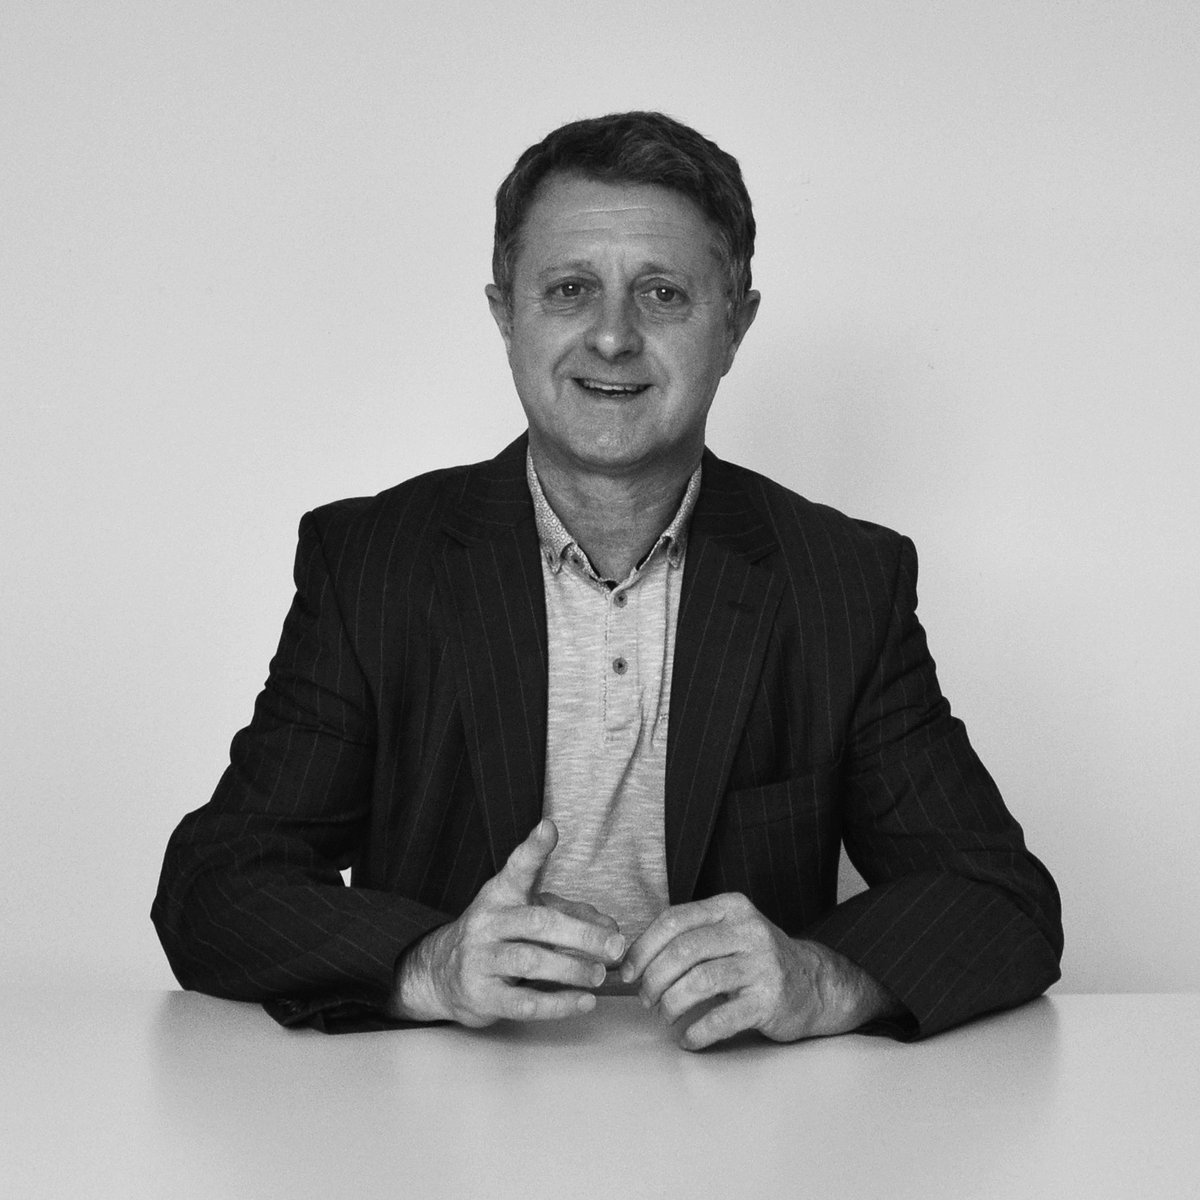 📣 Glasgow-based Director of @Collective_Arch, Chris Stewart, has been elected as the new President of the Royal Incorporation of Architects in Scotland, for a two year term which begins 29 June 2022. Find out more at rias.org.uk